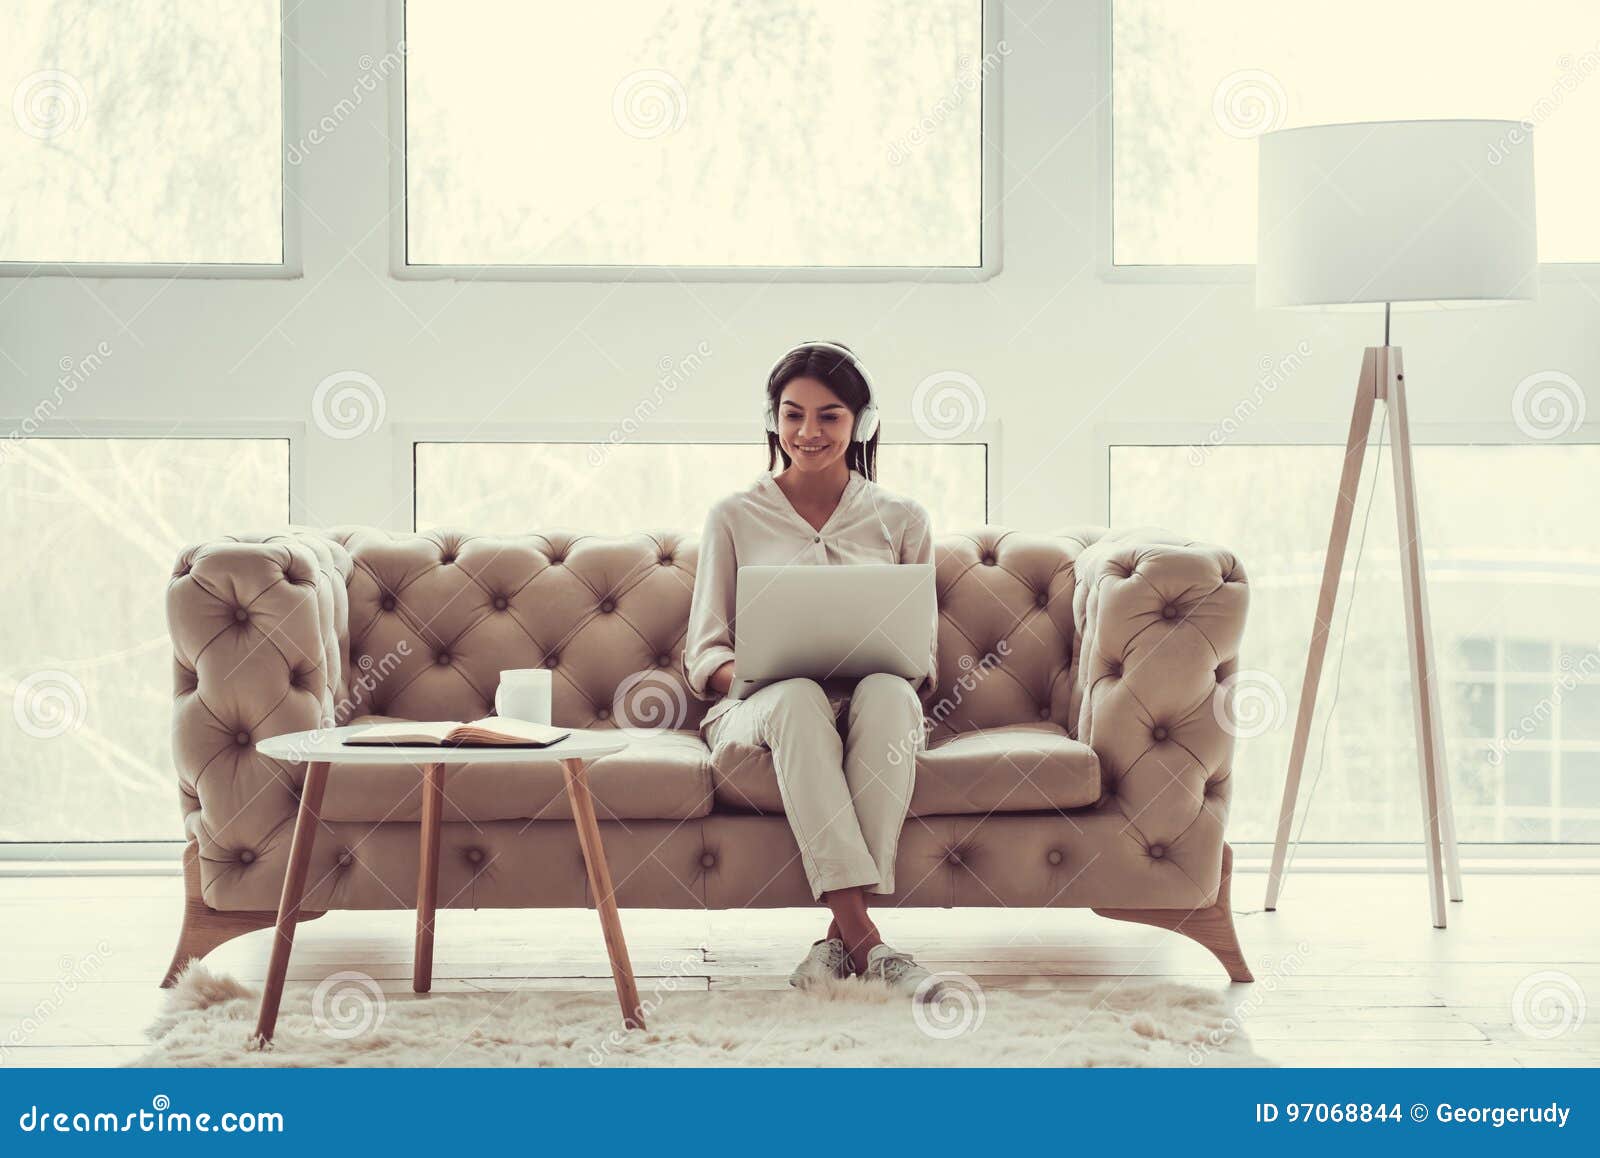 Girl in the living room stock photo. Image of portrait - 97068844